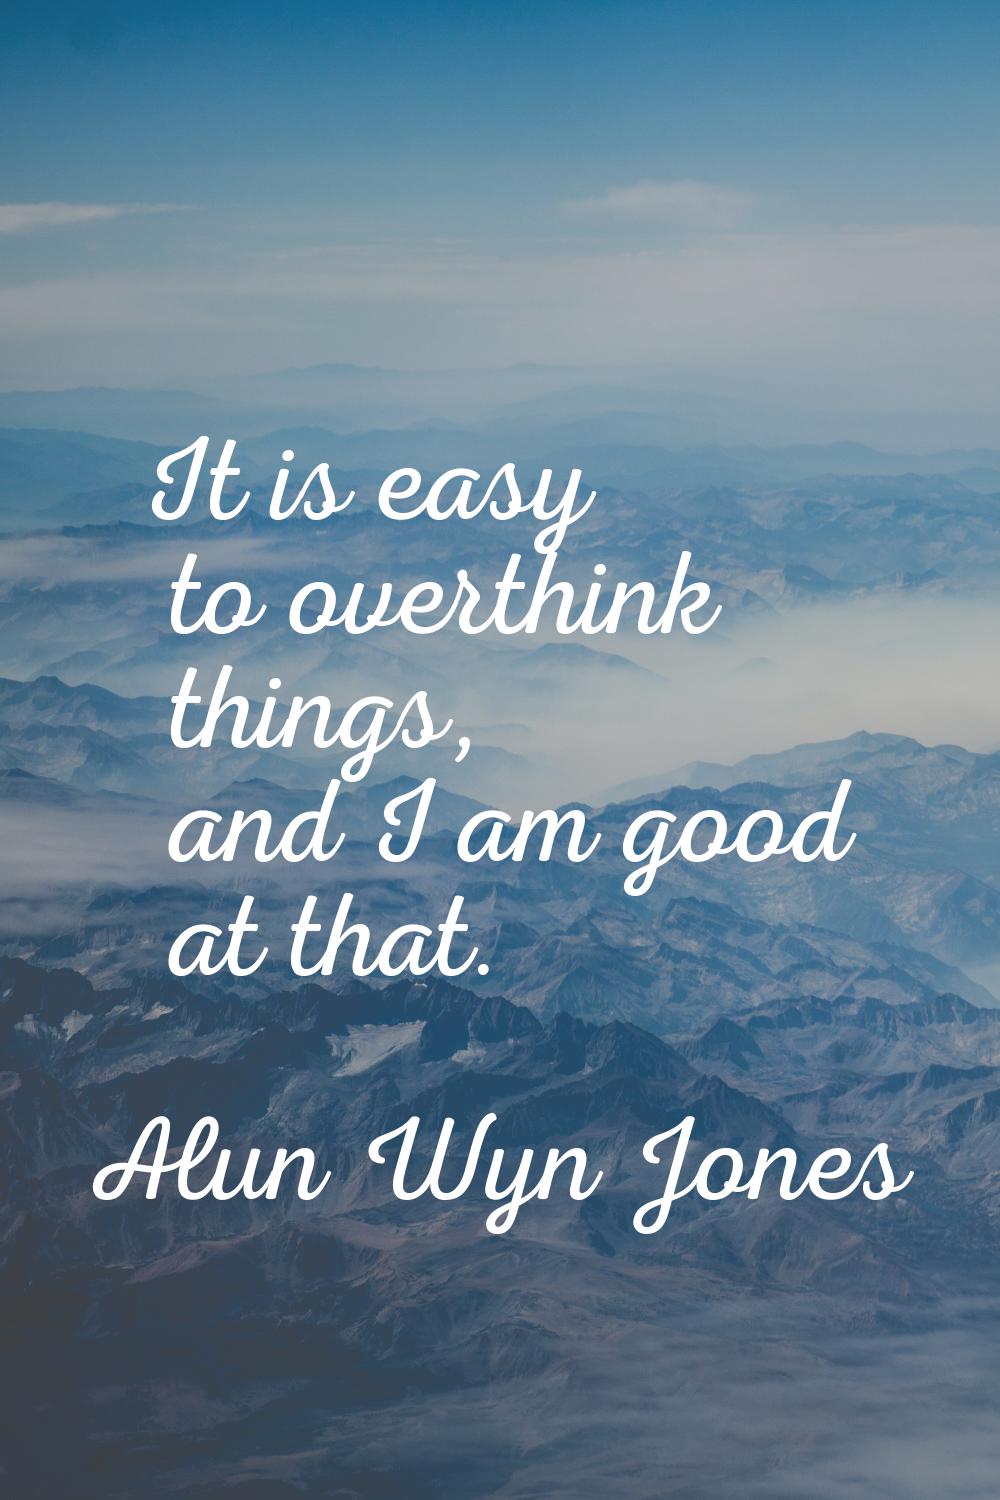 It is easy to overthink things, and I am good at that.